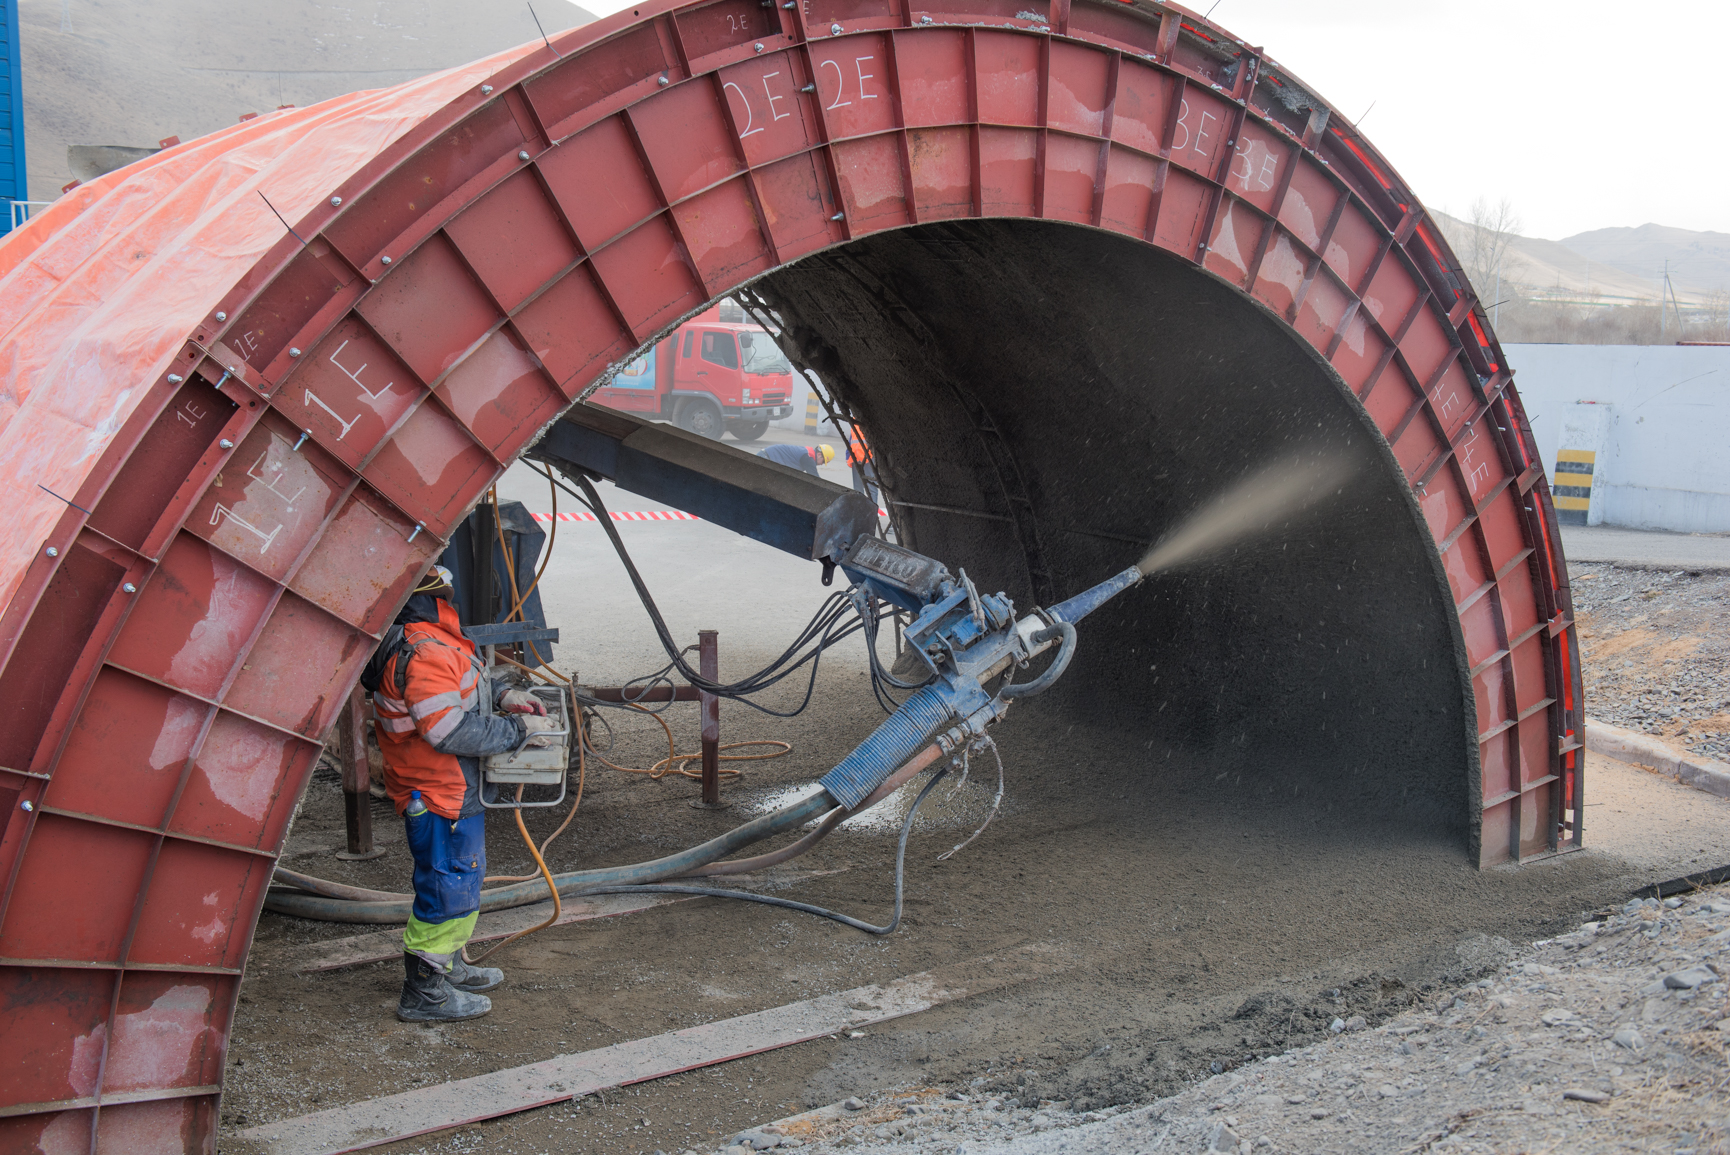 Spraying demonstration in a mock up tunnel